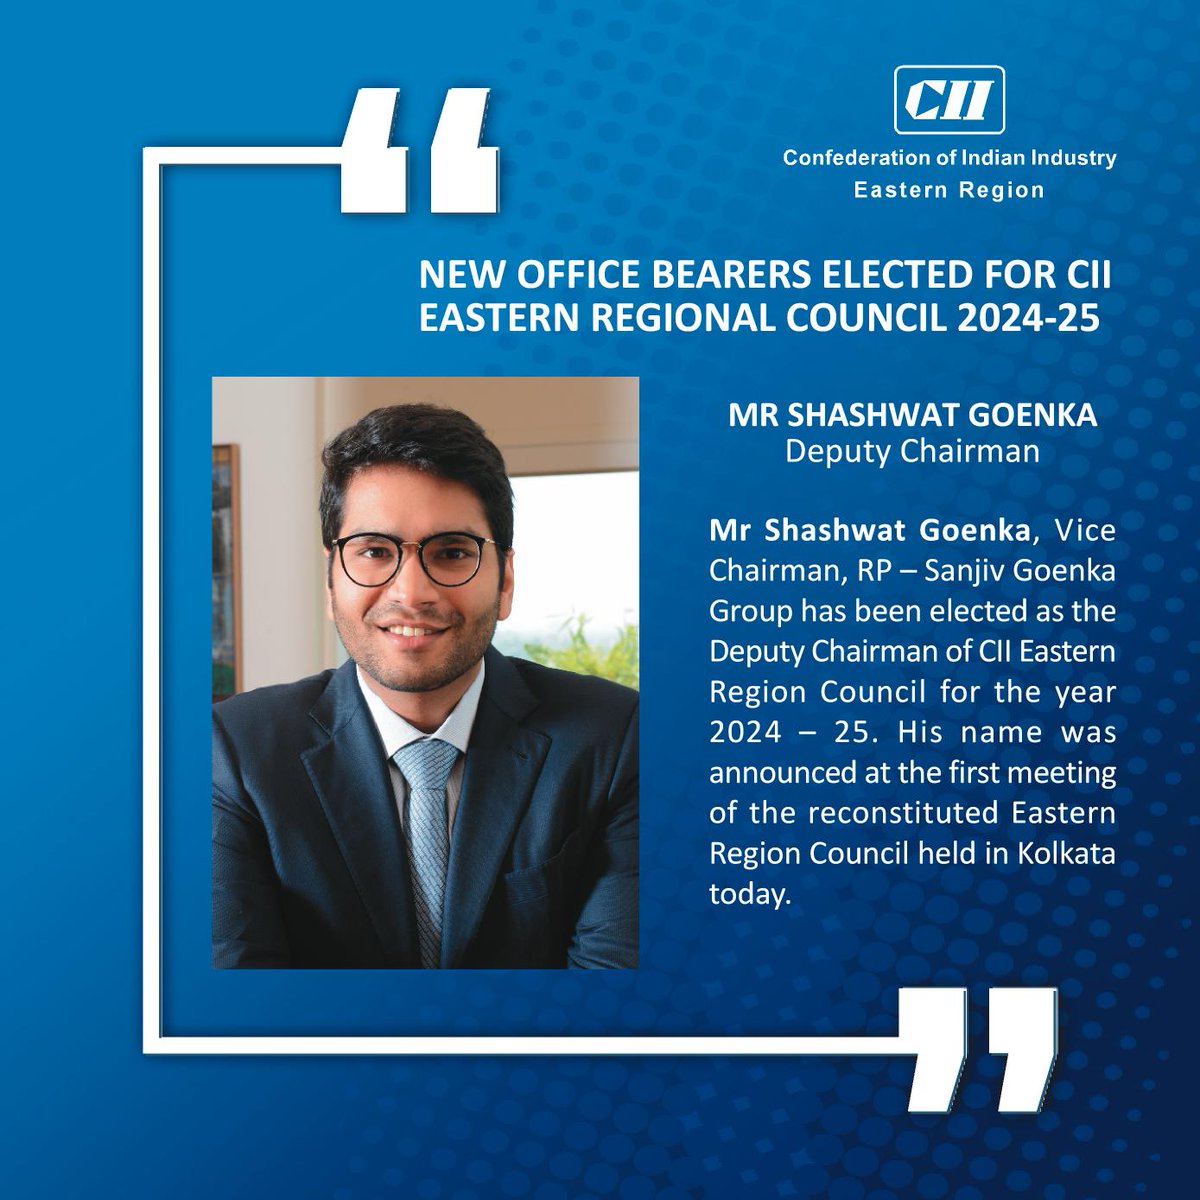 Mr Shashwat Goenka, Vice Chairman, RP – Sanjiv Goenka Group has been elected as the #DeputyChairman of CII Eastern Region Council for the year 2024 – 25. His name was announced at the first meeting of the reconstituted Eastern Region Council held in Kolkata.